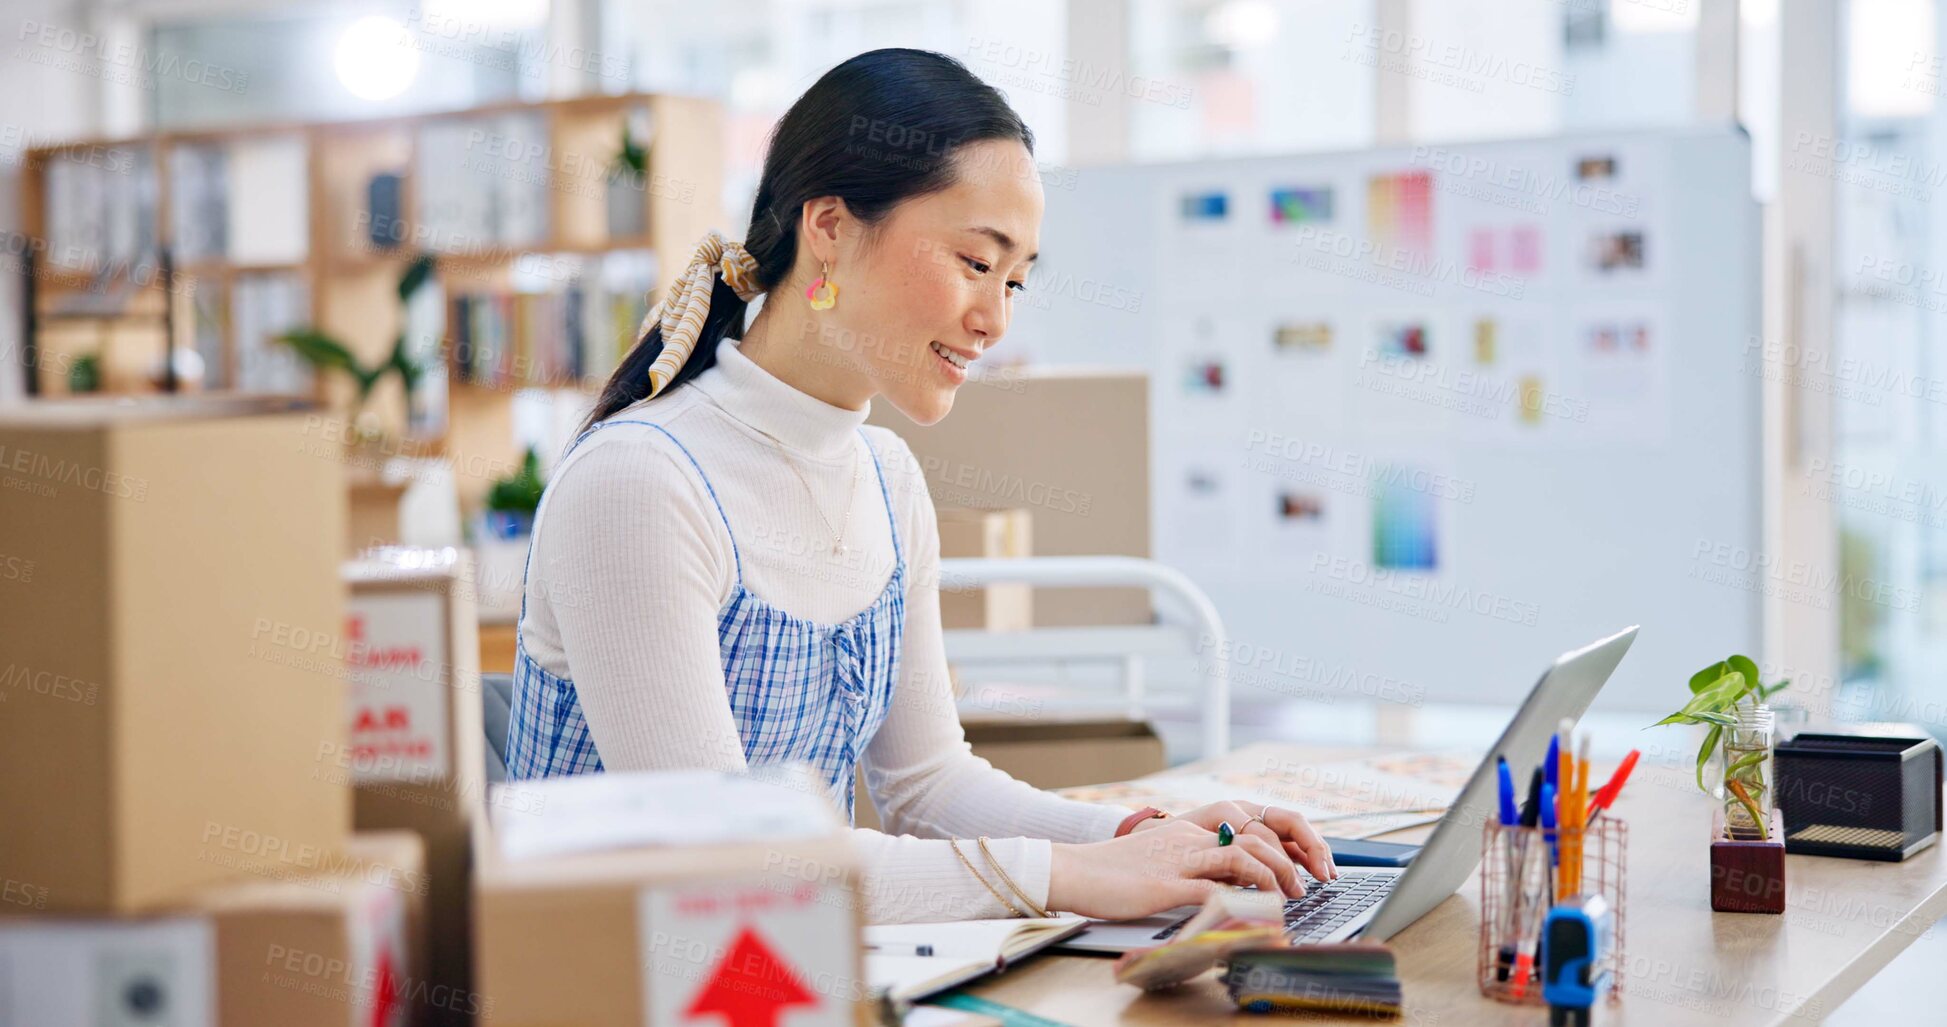 Buy stock photo Ecommerce, Asian woman at laptop with typing and smile for sales report and work at fashion startup. Online shopping, boxes and small business owner with happiness, computer and website shop at desk.